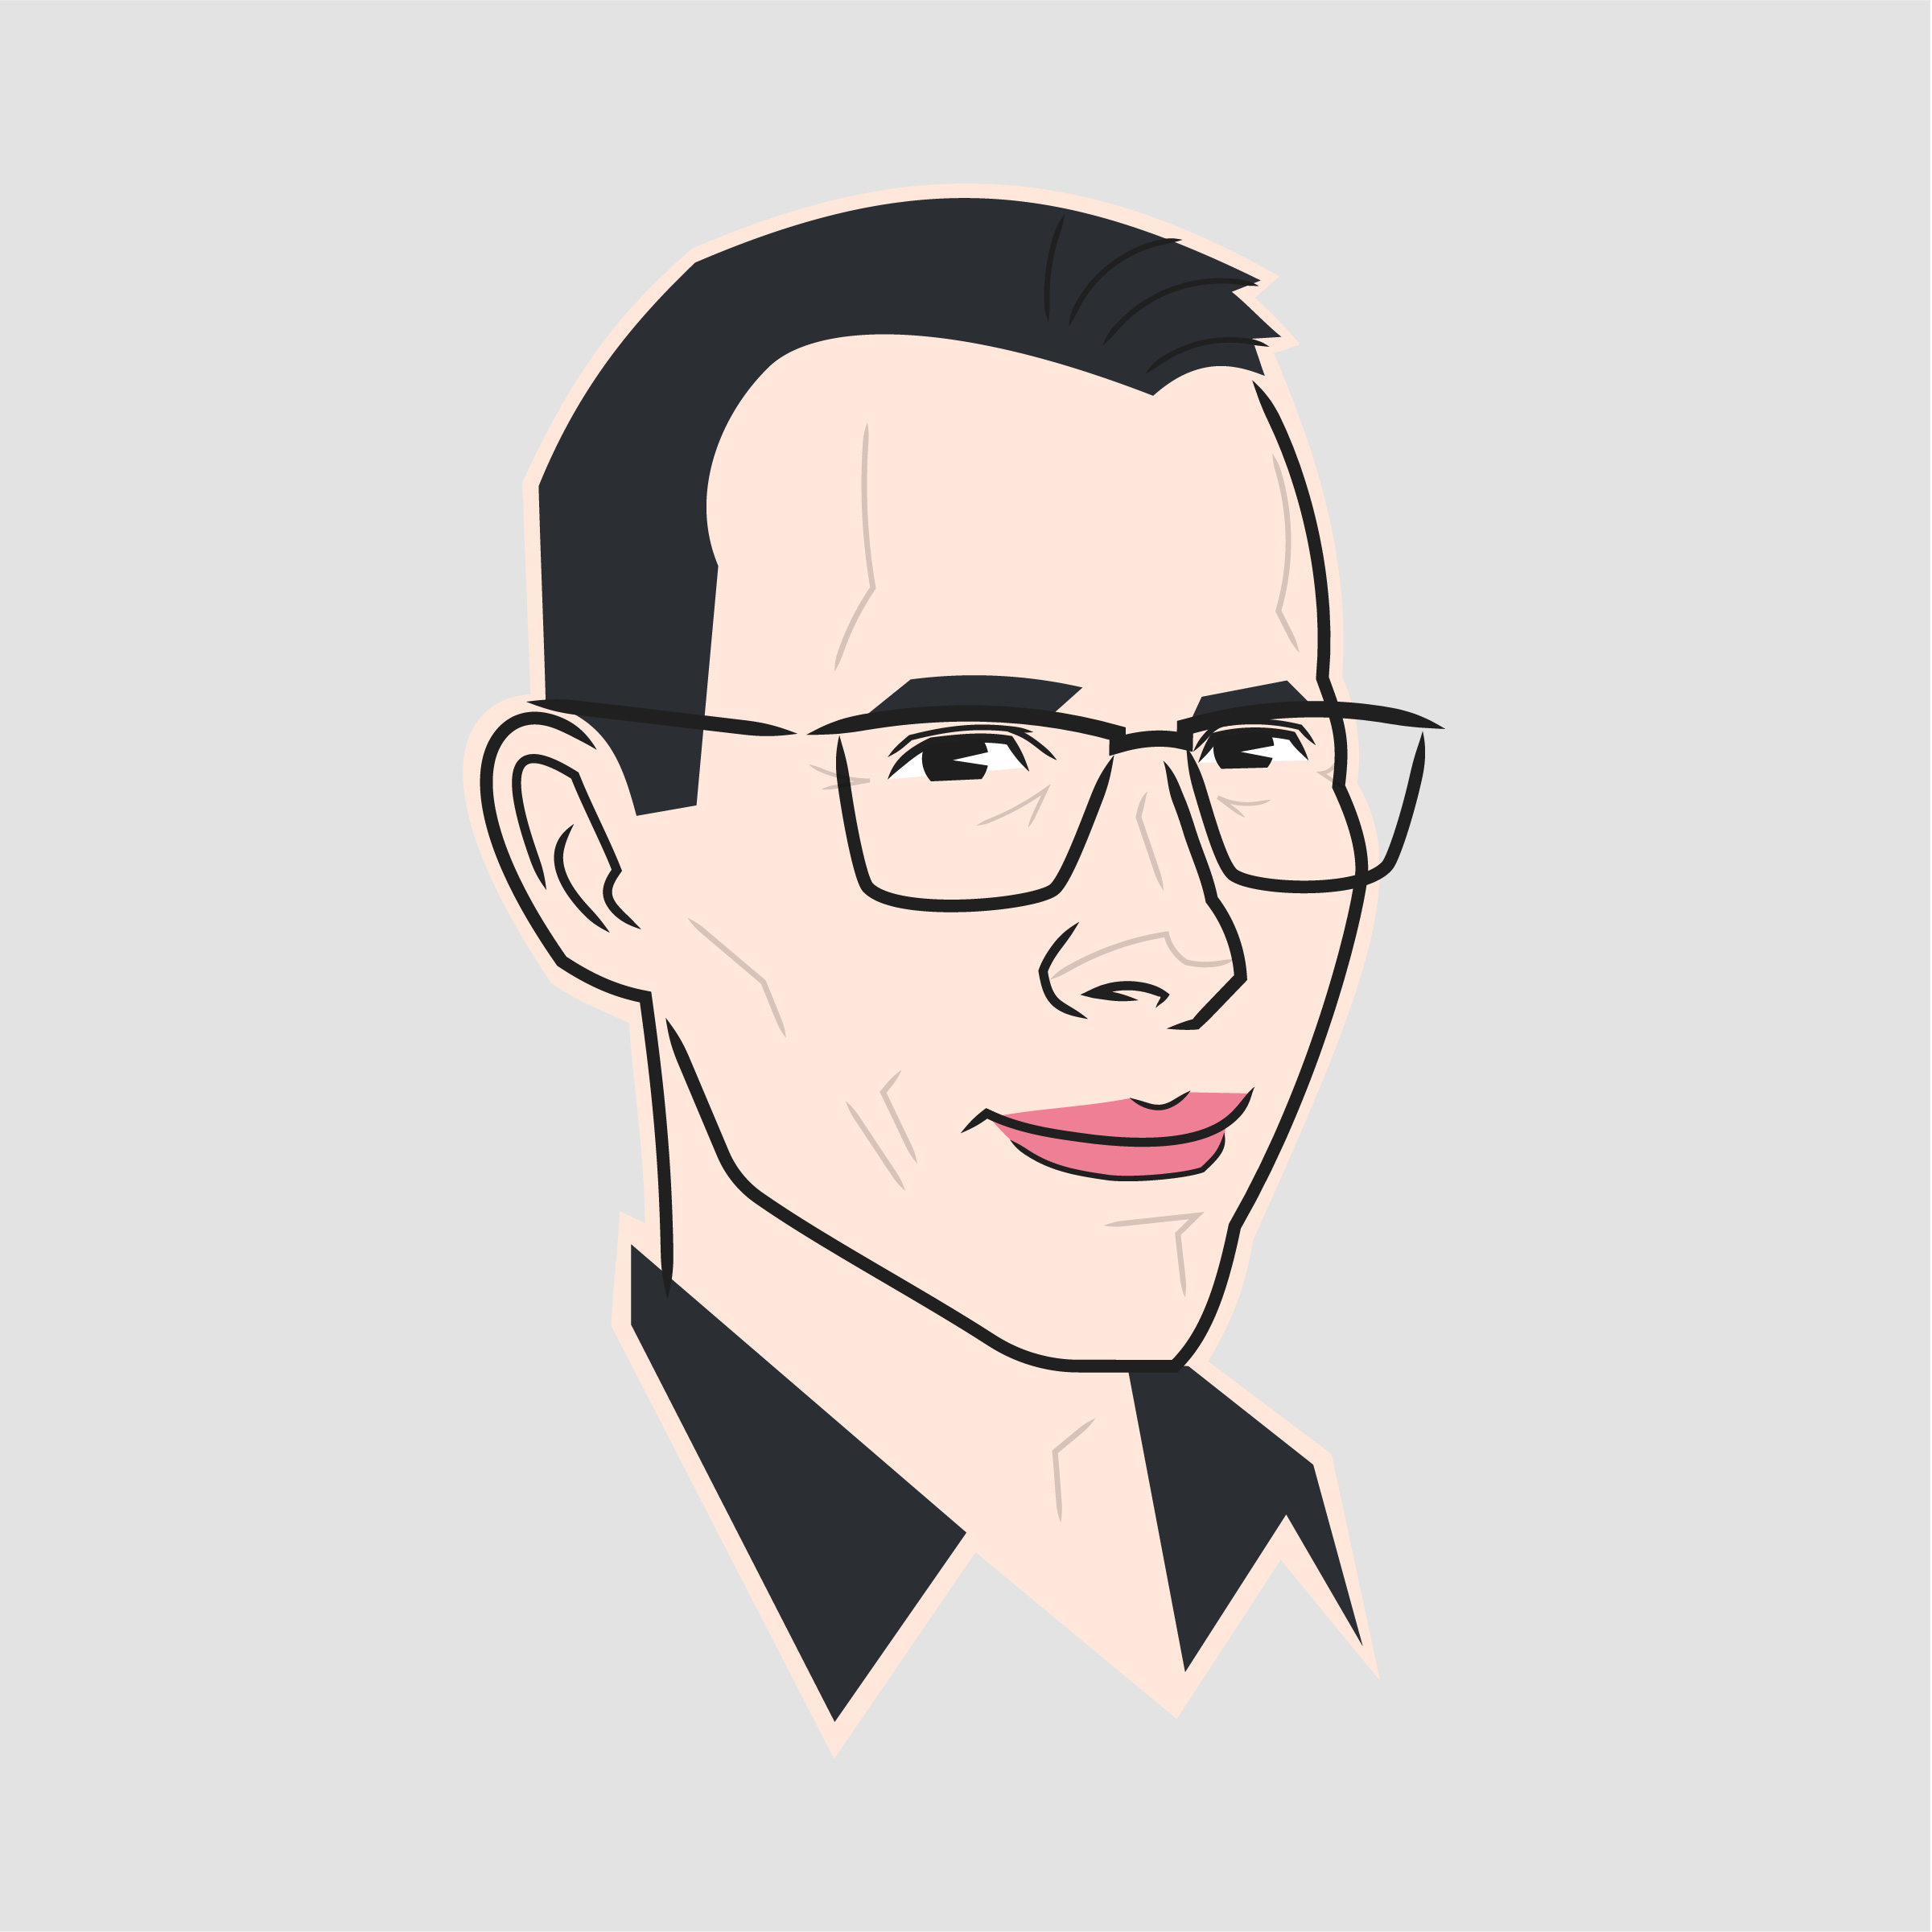 A vector illustration with dark, slicked-back hair, wearing glasses and a black collared shirt. He has a neutral expression.